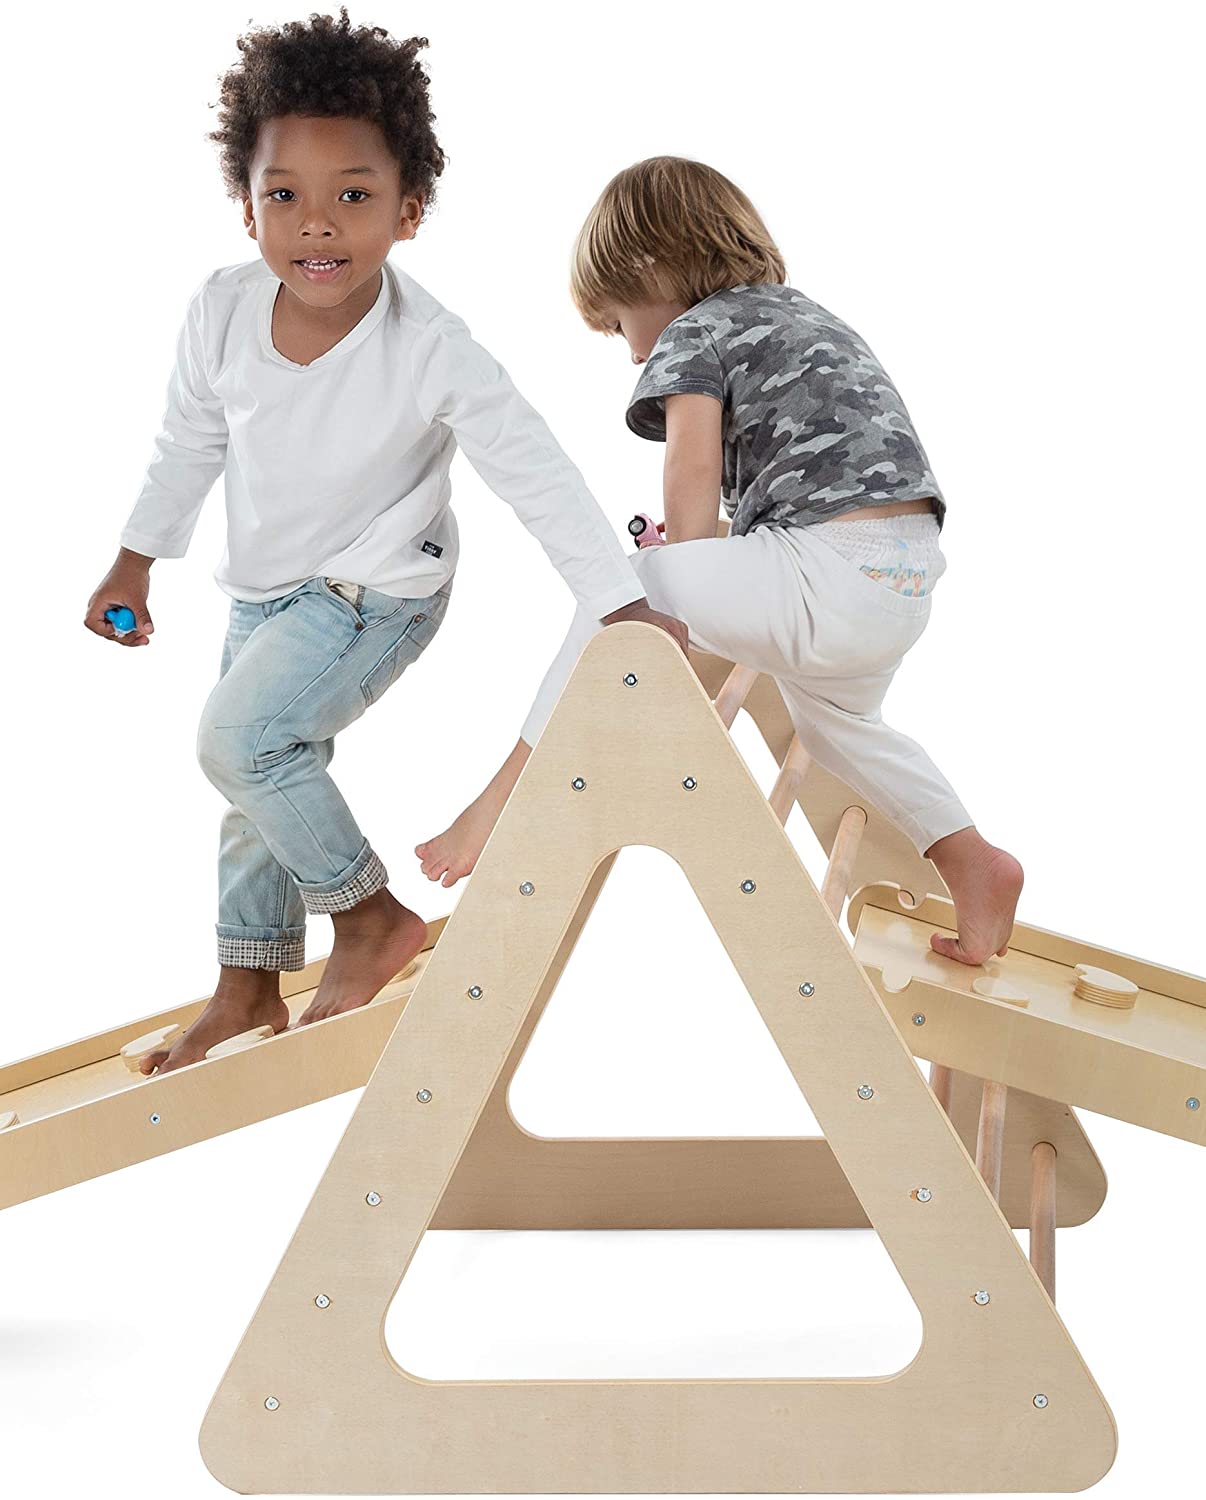 Top 5 Best Pikler Triangles for Toddlers